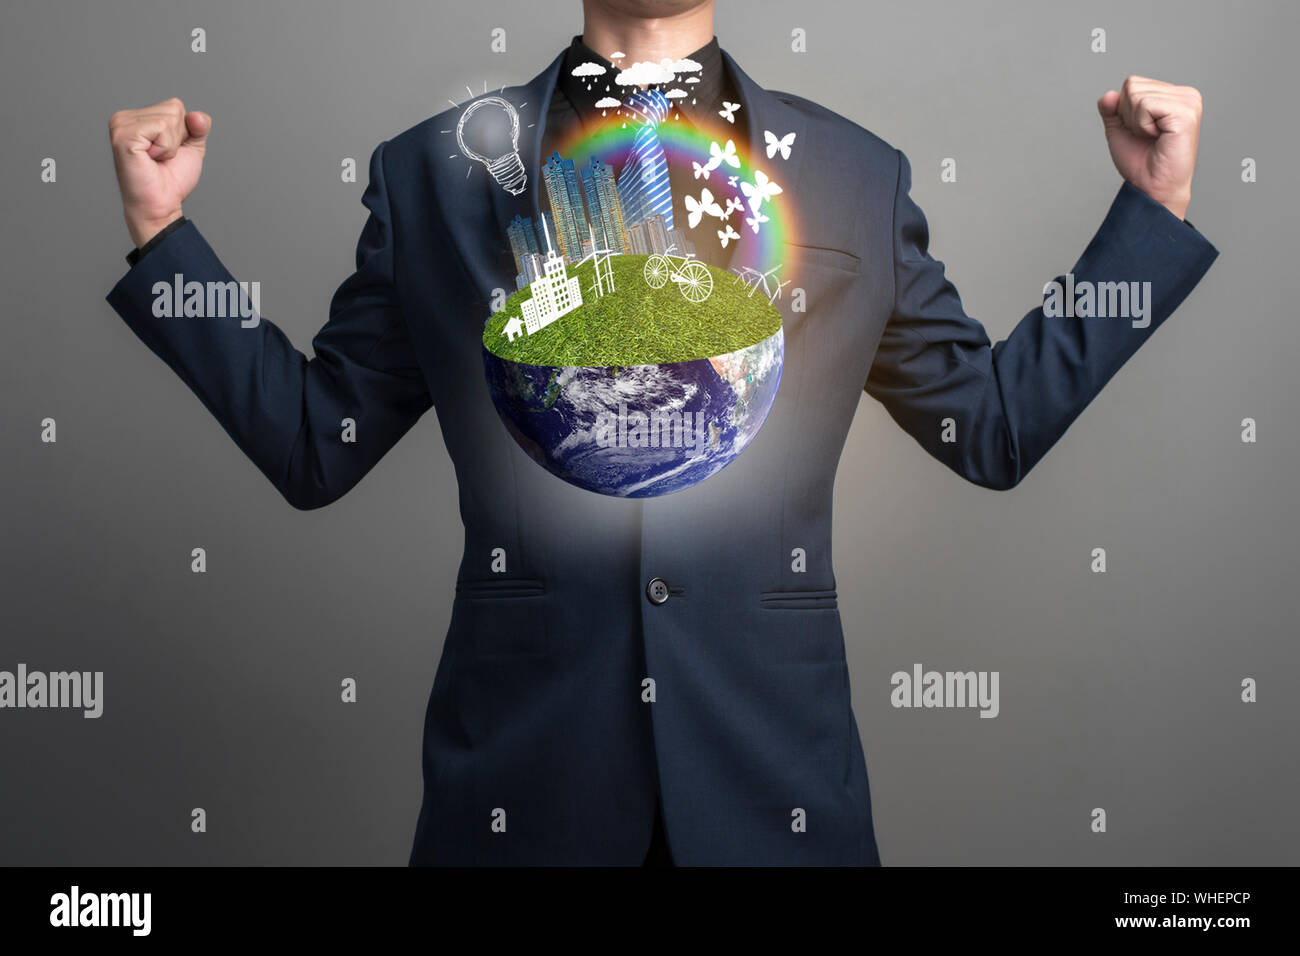 Digital Composite Image Of Businessman Showing Environmental Conservation Against Gray Background Stock Photo